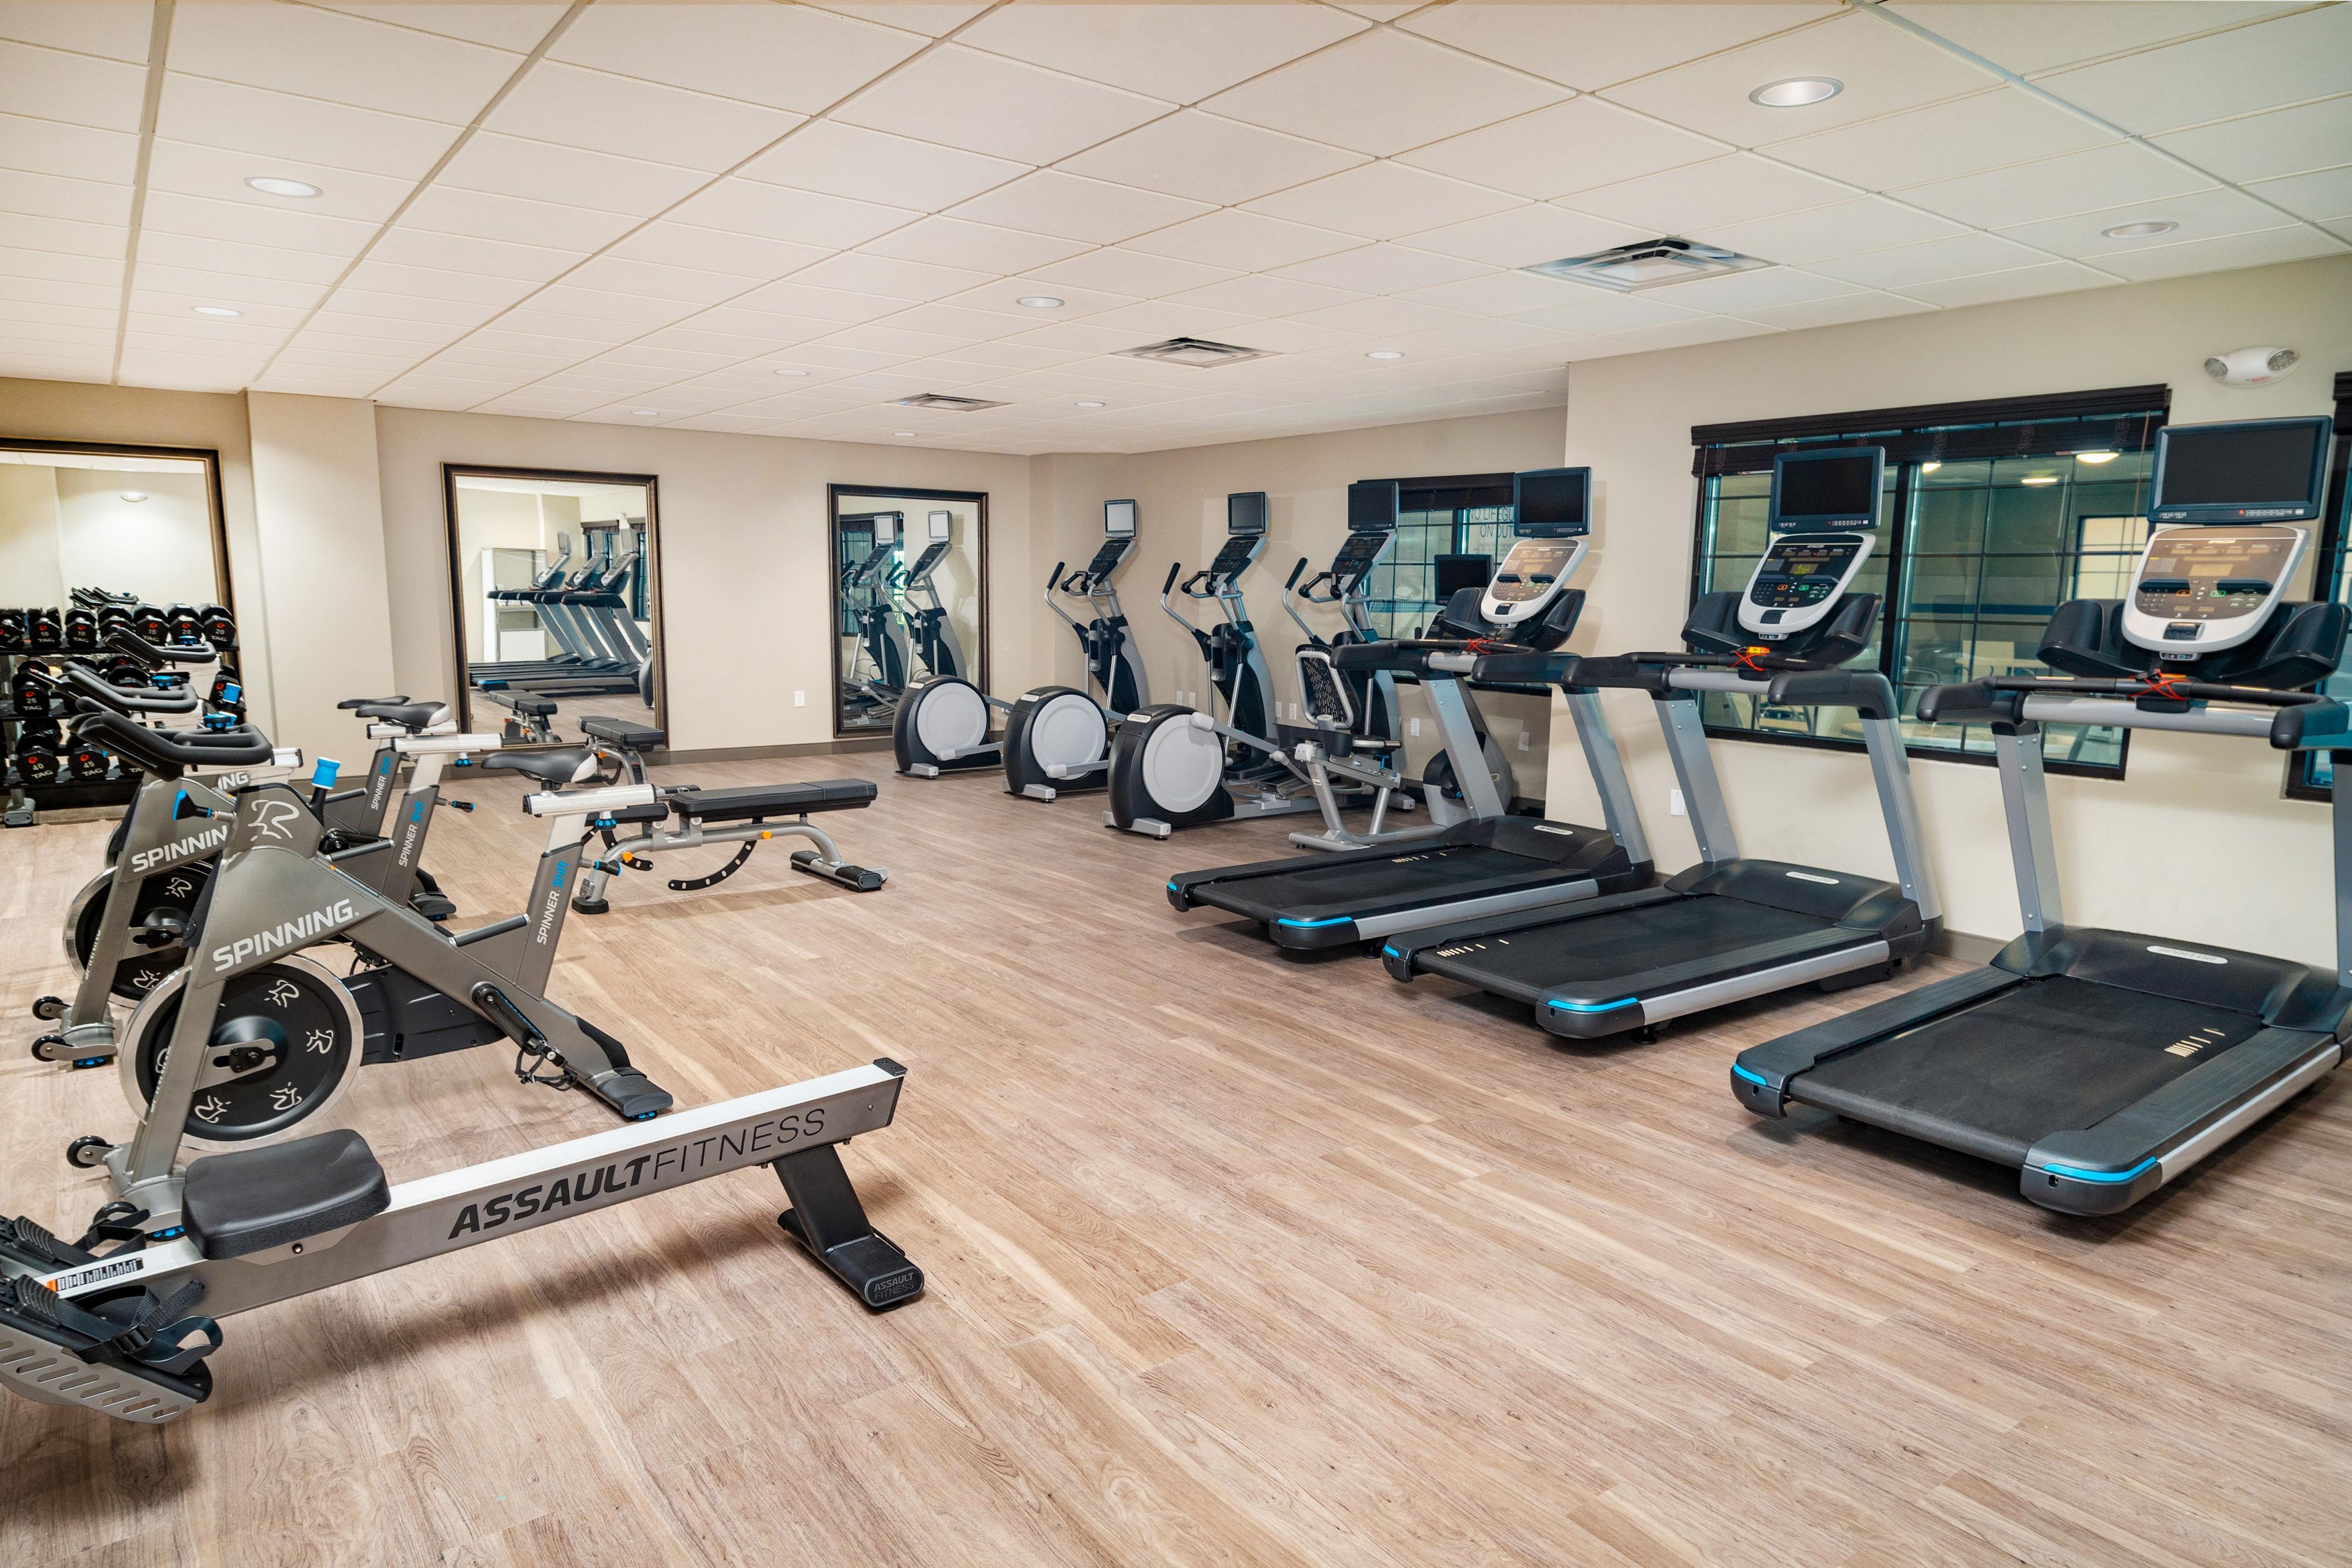 Break a sweat and turbocharge  in our upscale modern fitness center with state-of-the-art strength training equipment, cardio machines and free weights. 
